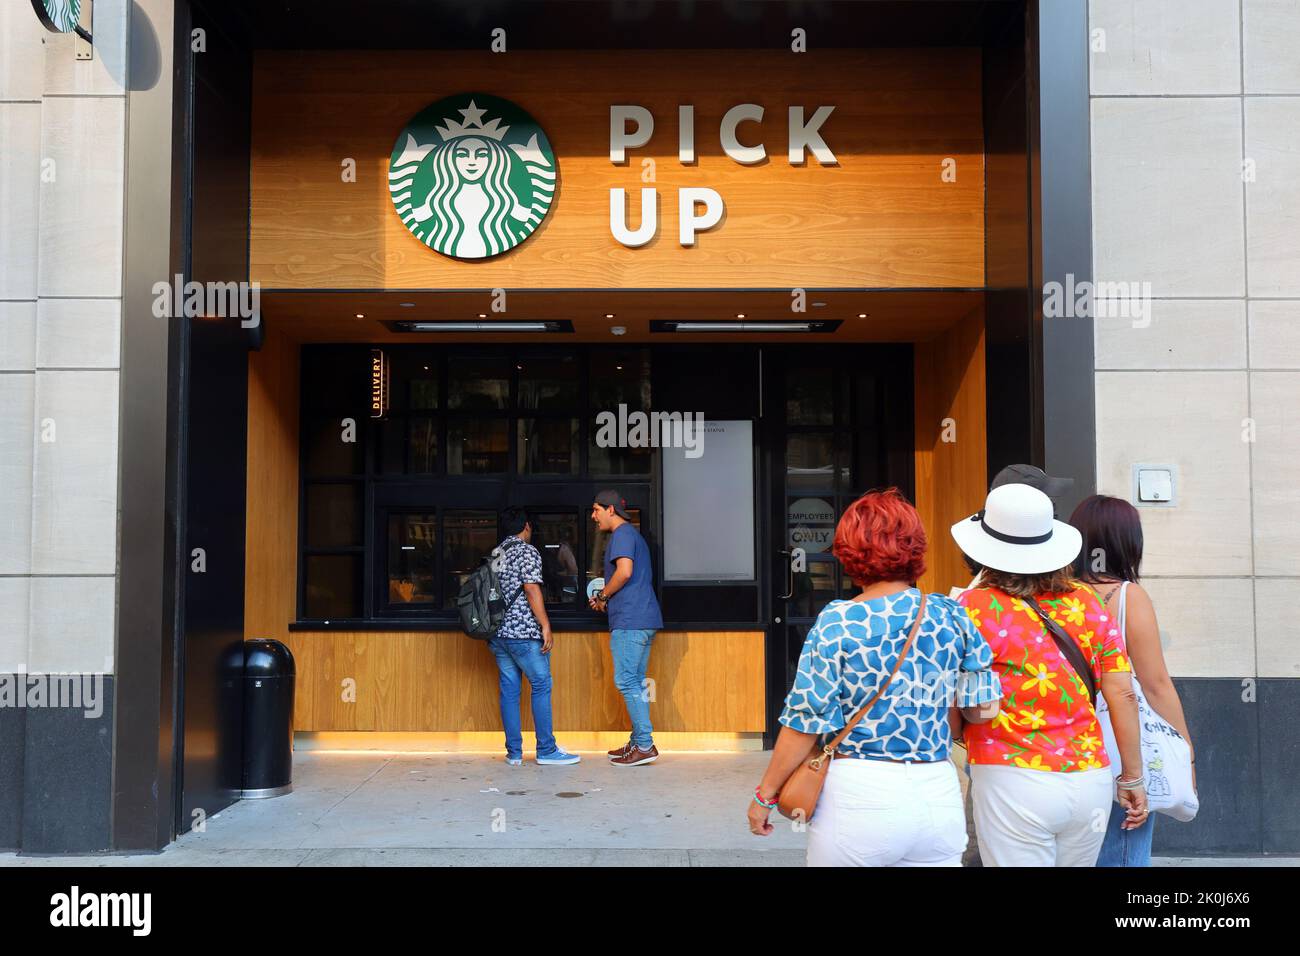 Starbucks Pick Up, 485 5th Ave, New York, NYC storefront photo of a seatless coffee shop location optimized for digital orders on the go. Stock Photo